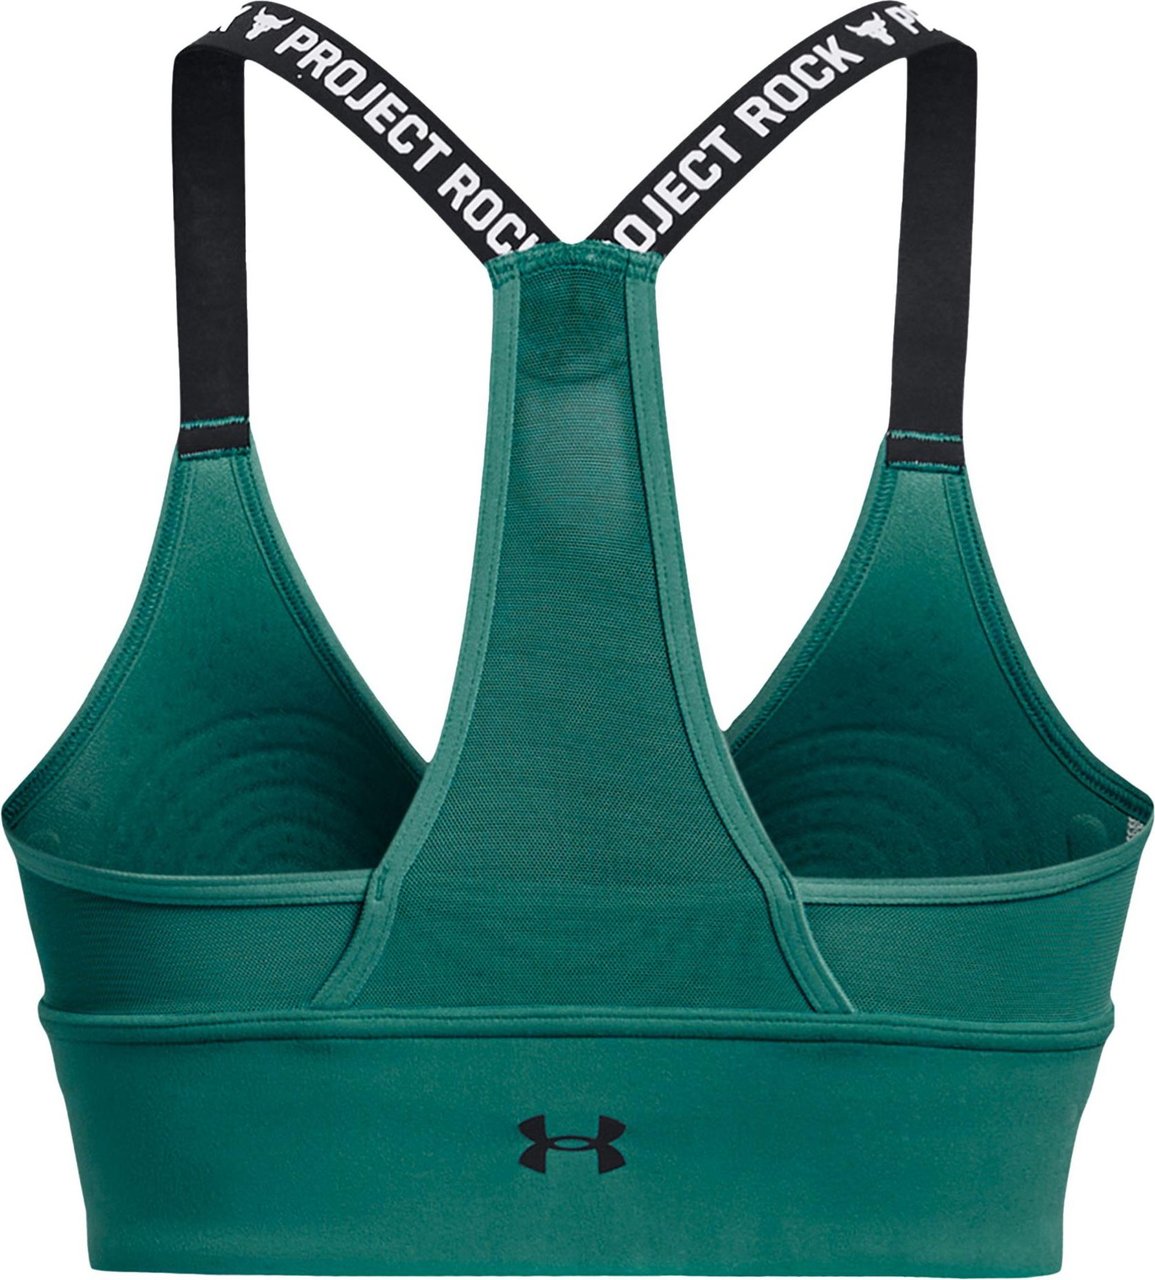 Under Armour Top Woman Project Rock Infinity Mid D 1373590-722 Groen